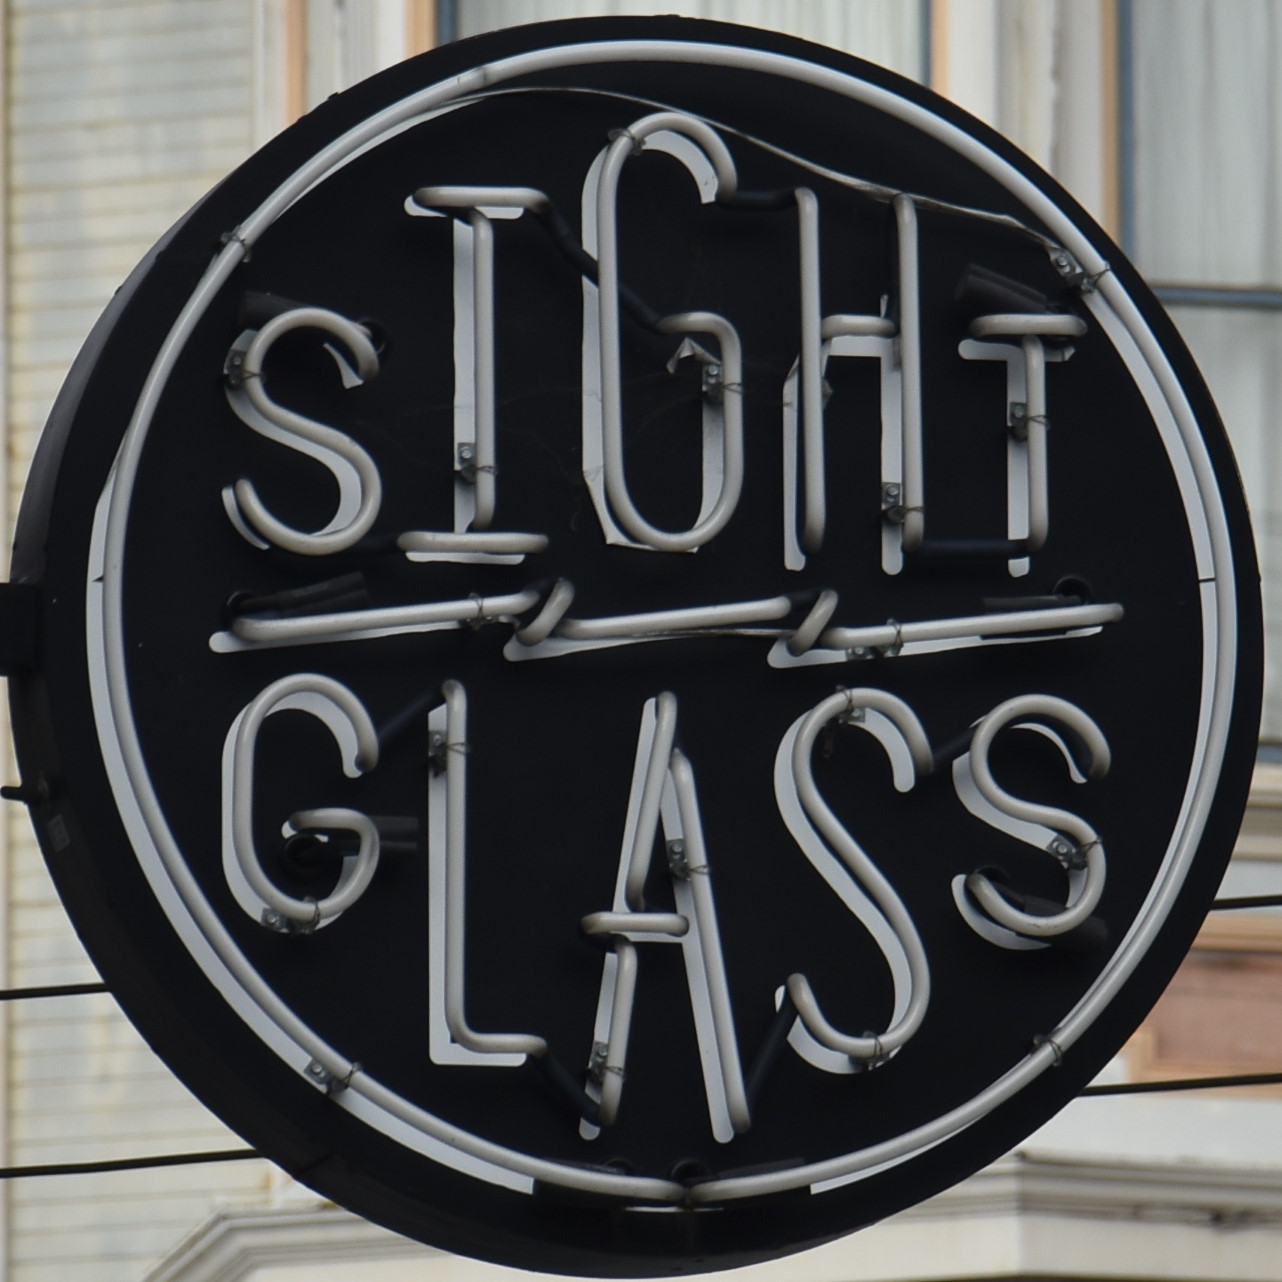 The circular Sightglass logo, with the word "Sight" on top, "Glass" at the bottom and a horitonal lightning bolt separating the two.